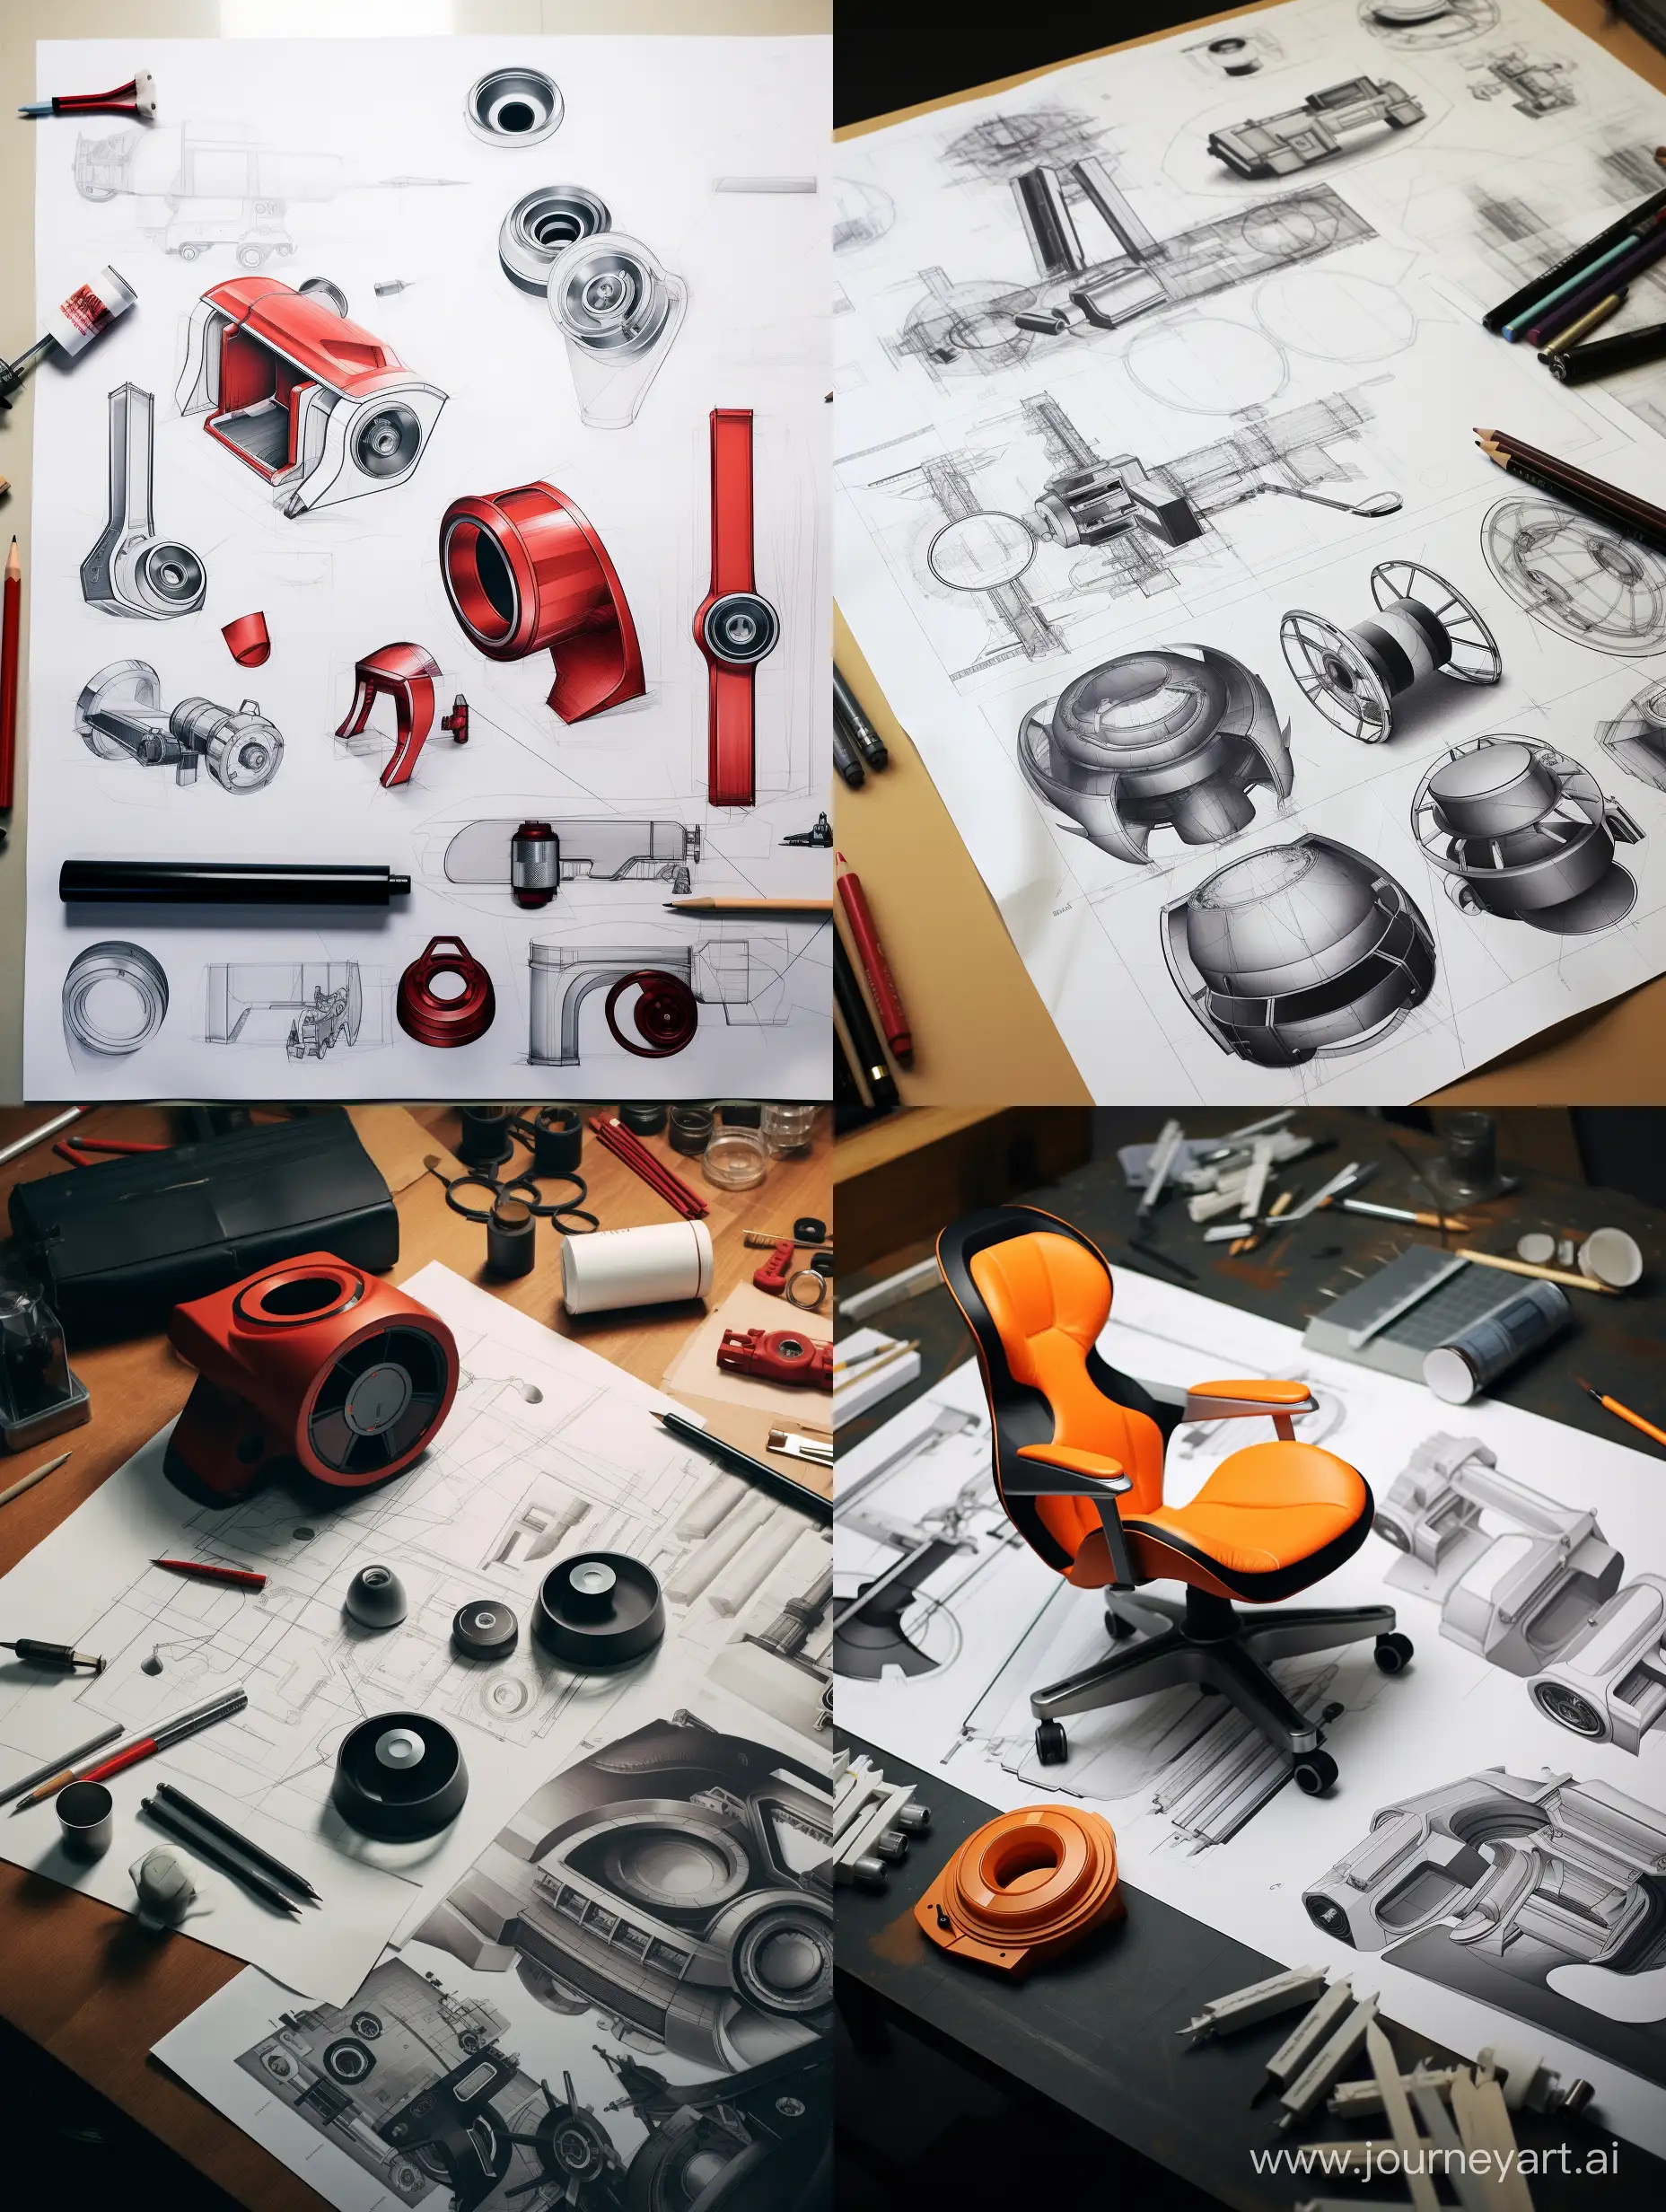 Design a poster with the theme of industrial design. Use product design sketches in the poster